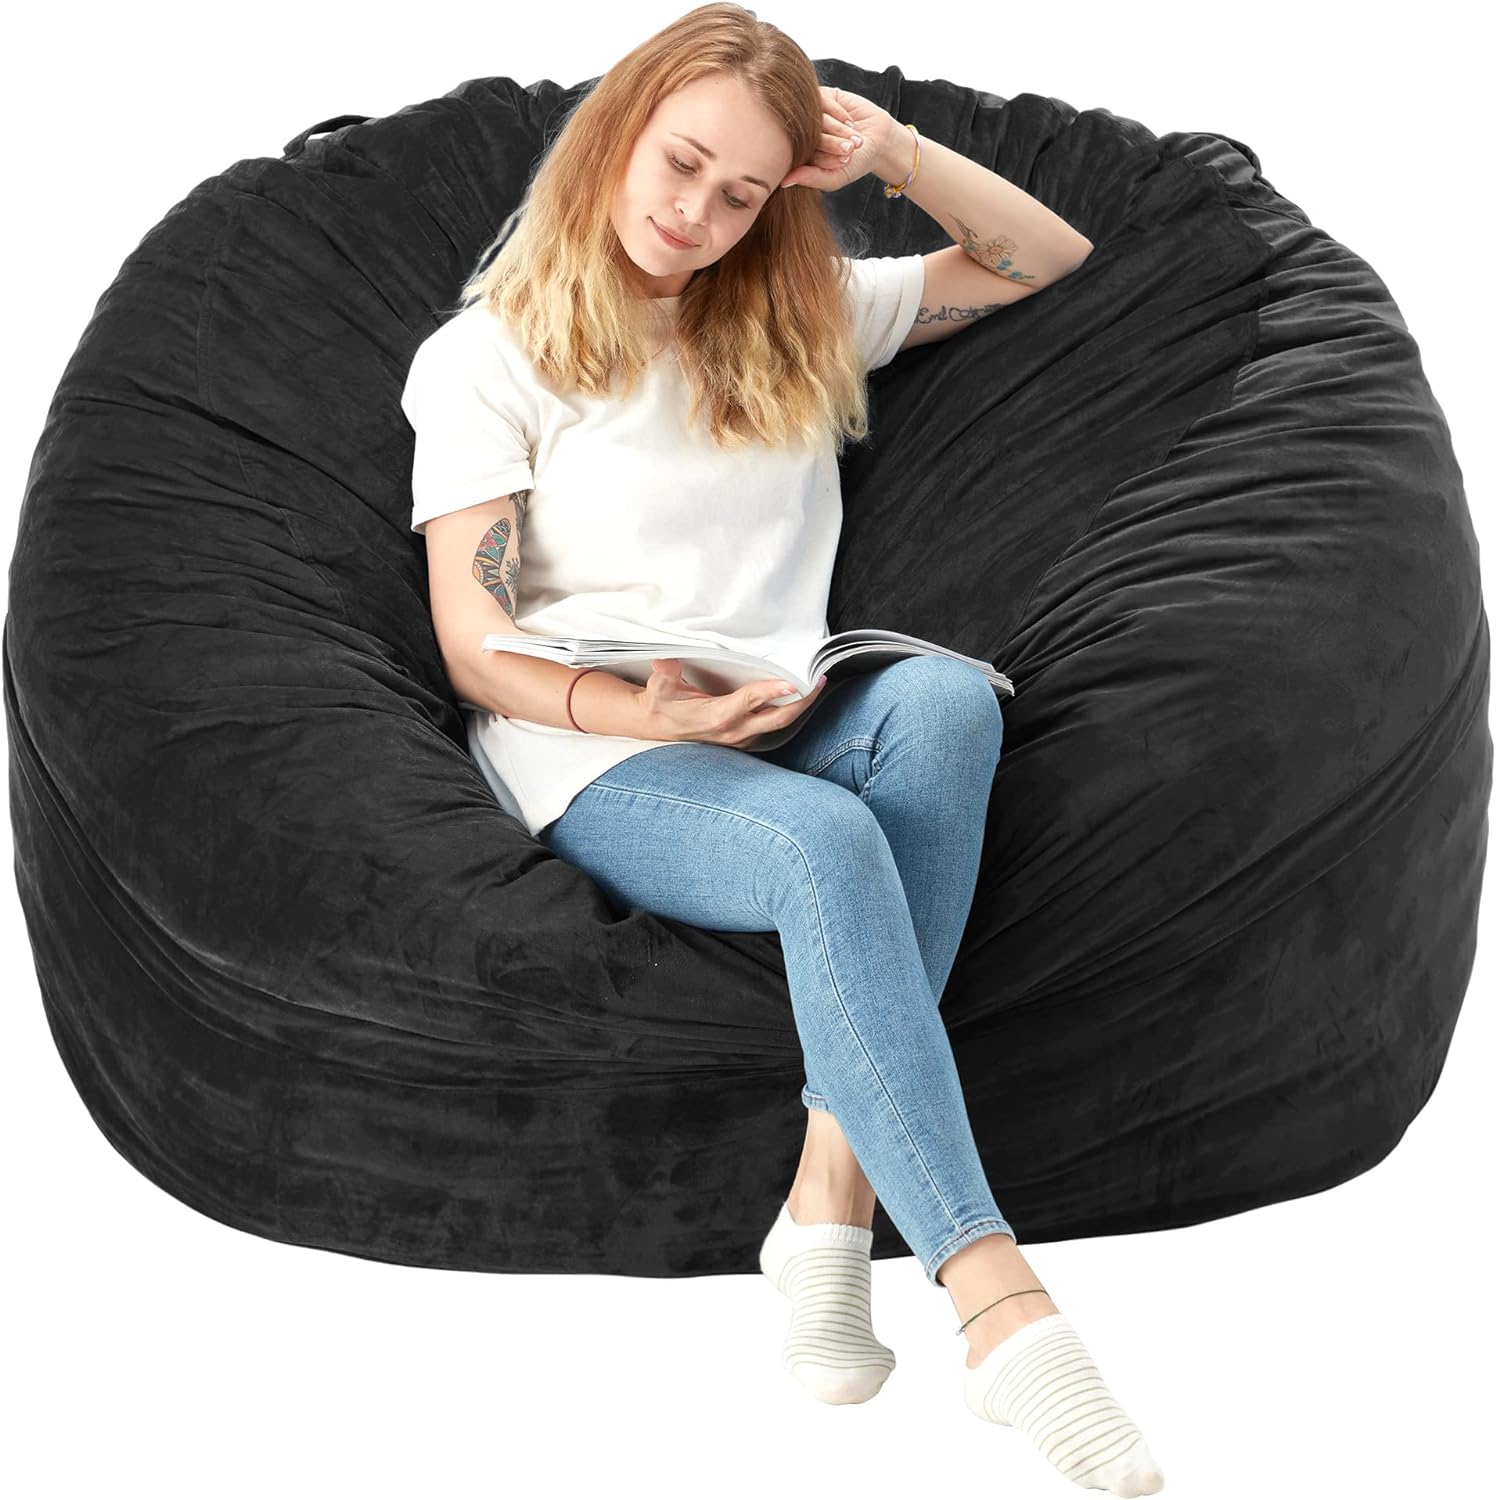 Homguava Bean Bag Chair: Large 5' Bean Bags with Memory Foam Filled, Large Beanbag Chairs Soft Sofa with Dutch Velet Cover-56×56"×36" (Black)